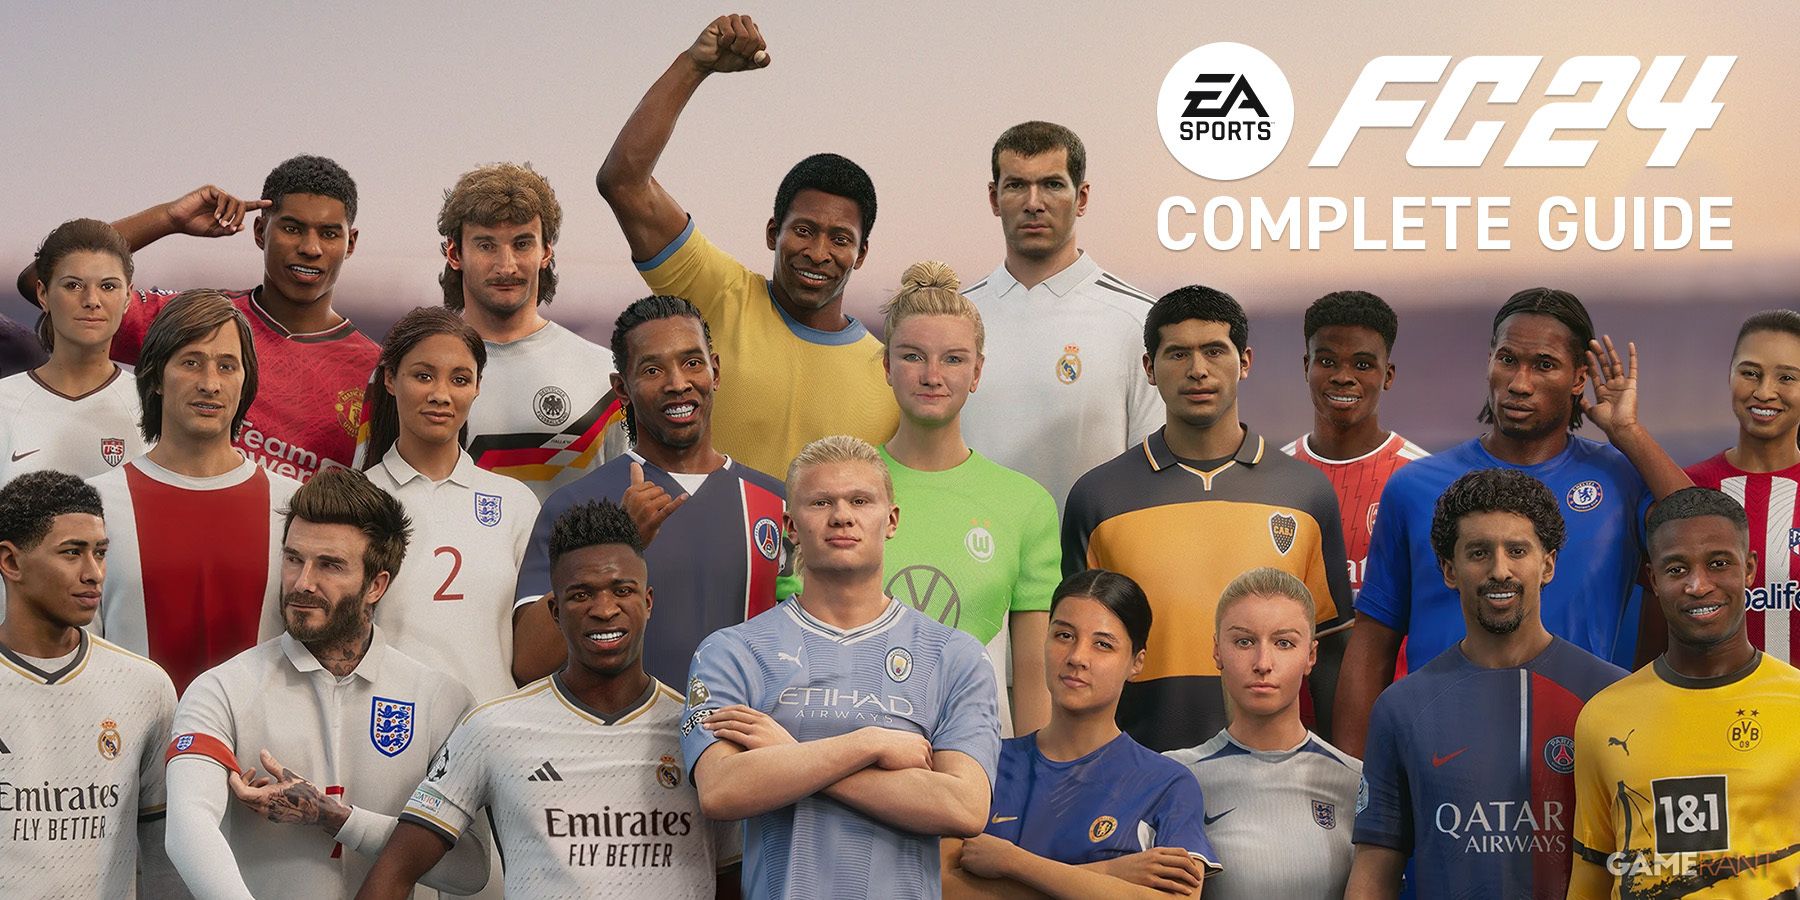 FIFA 24 NEWS  ALL *NEW* CAREER MODE FEATURES & LEAKS ✓ (EA